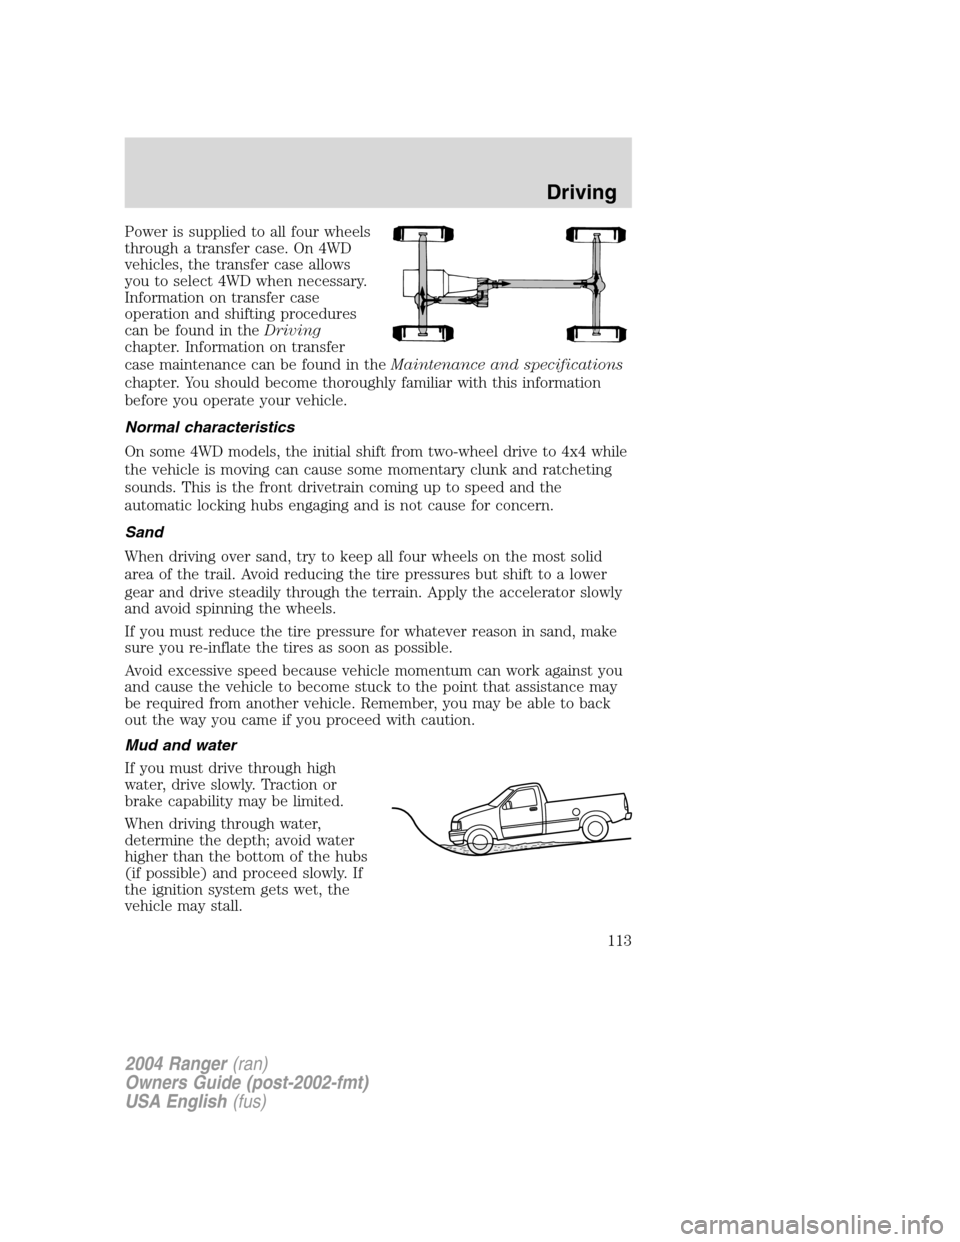 FORD RANGER 2004 2.G Owners Manual Power is supplied to all four wheels
through a transfer case. On 4WD
vehicles, the transfer case allows
you to select 4WD when necessary.
Information on transfer case
operation and shifting procedures